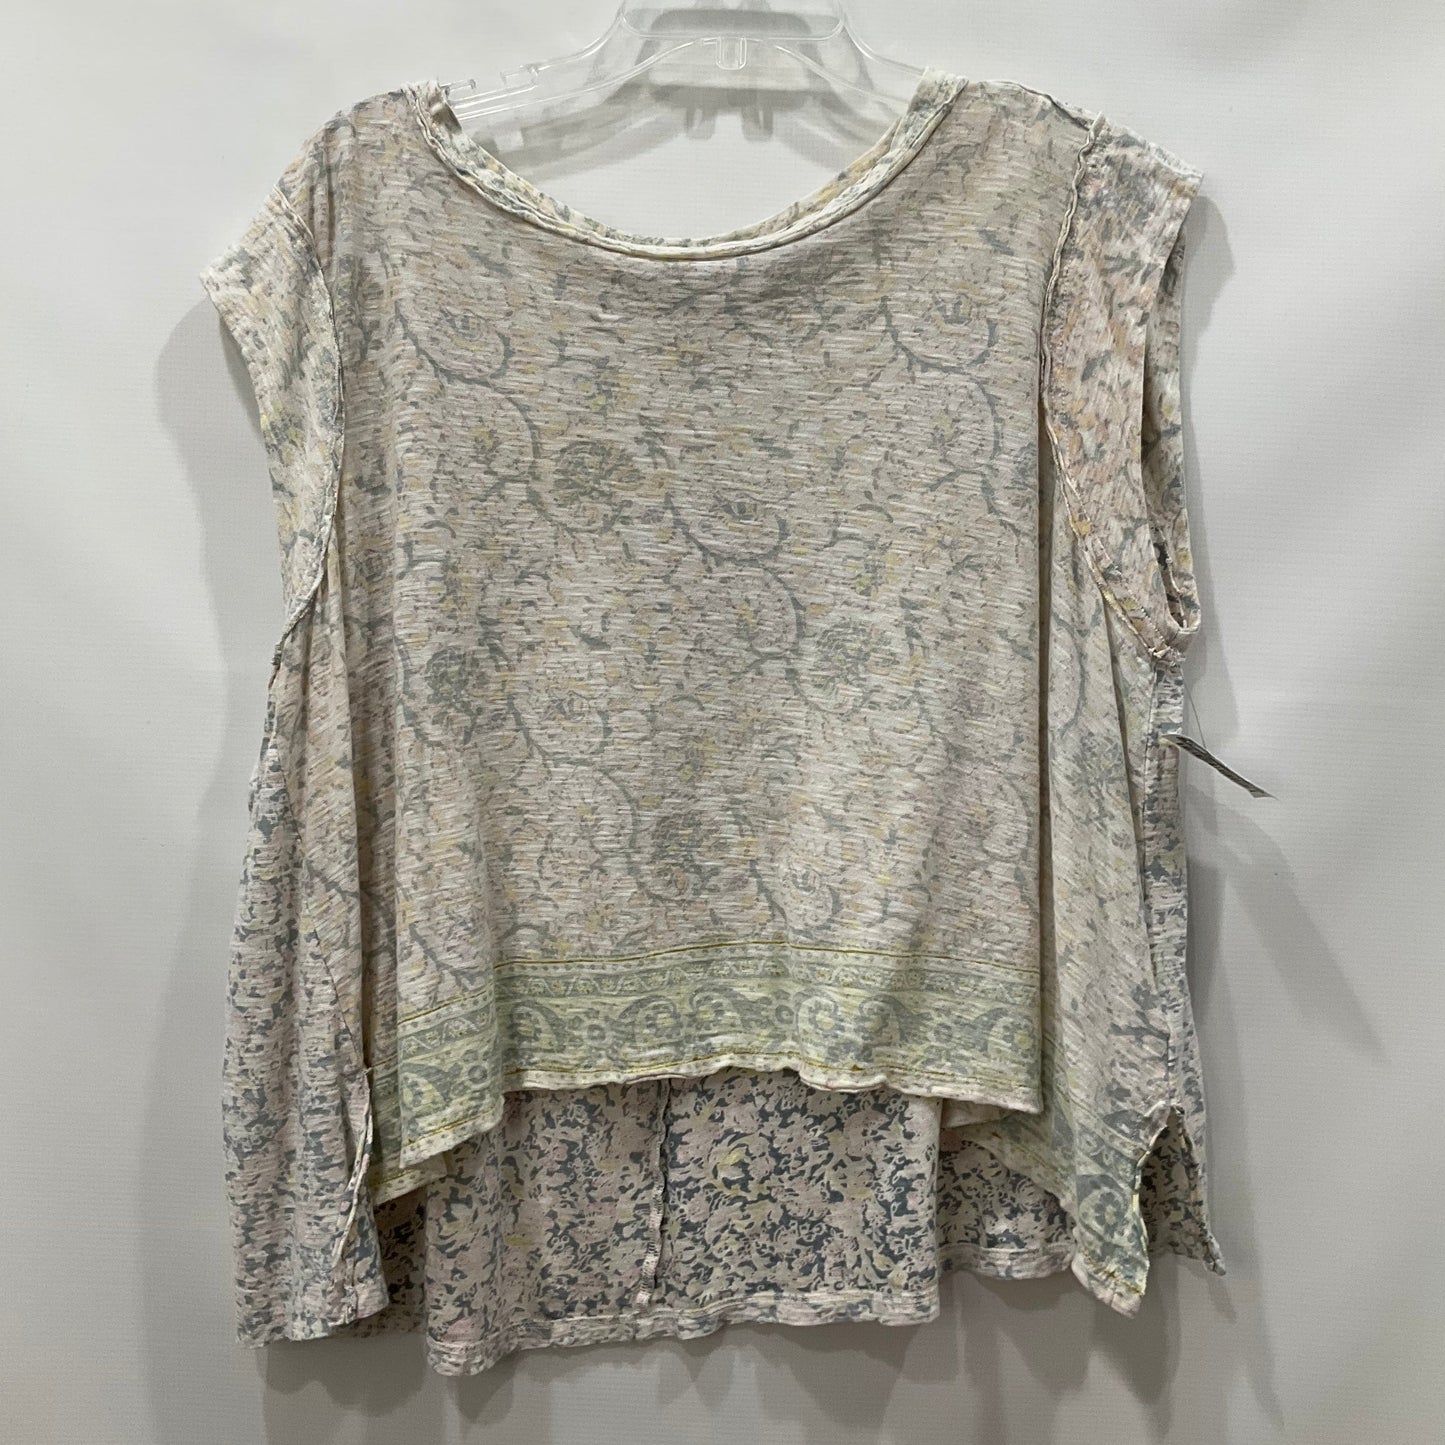 Multi-colored Top Short Sleeve Free People, Size Xs